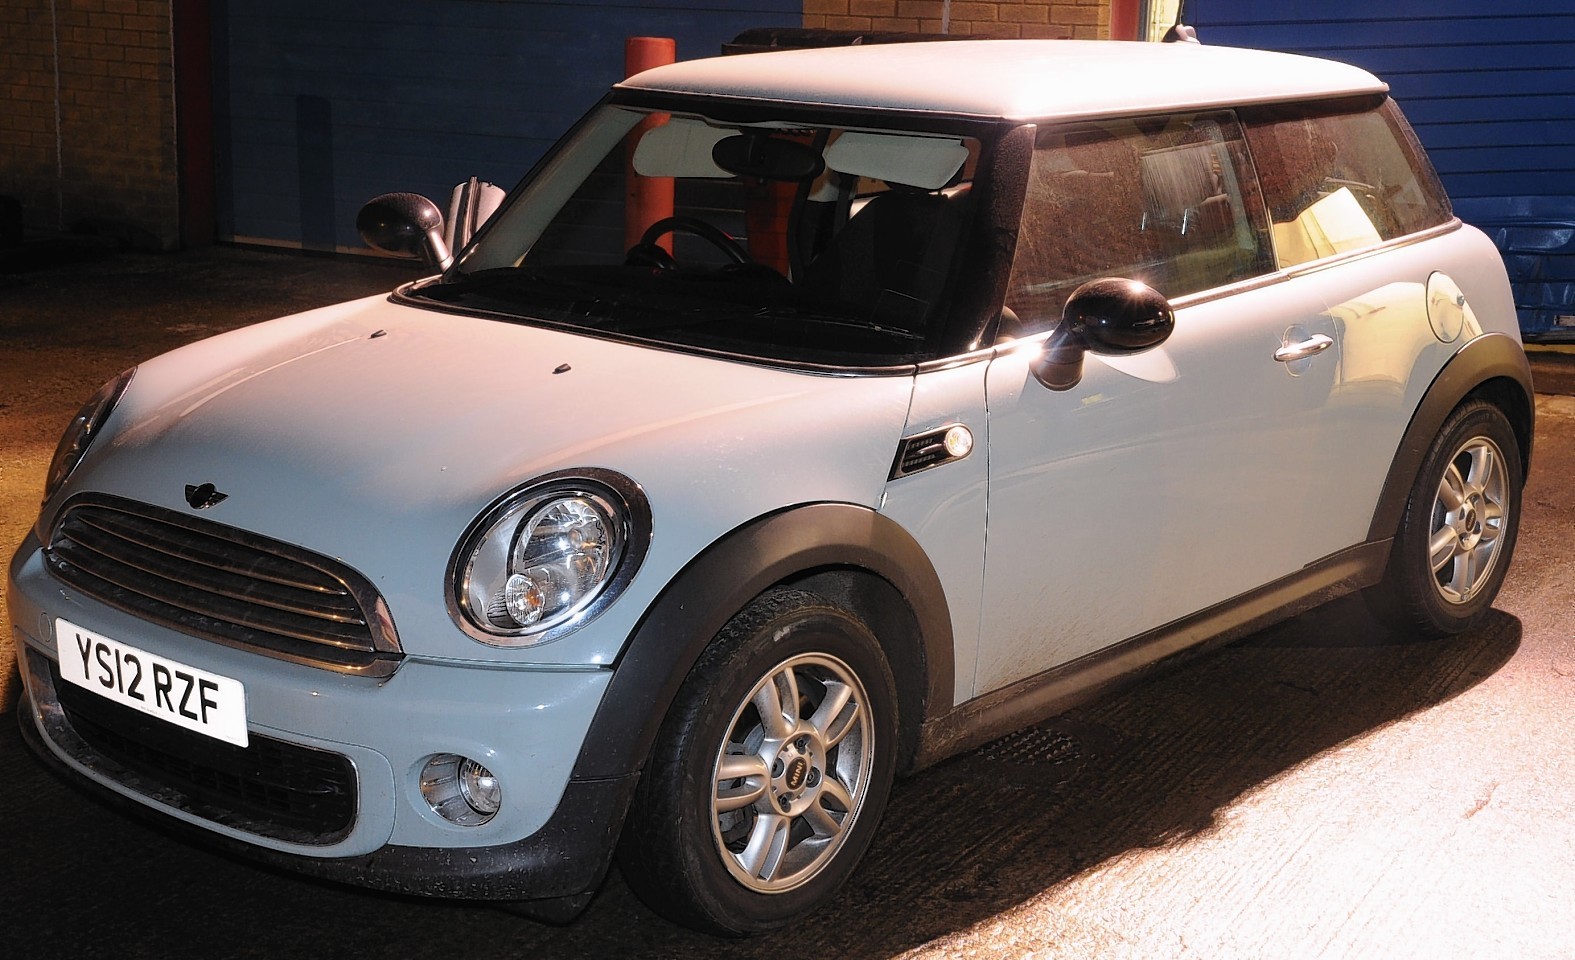 The mini used in the theft